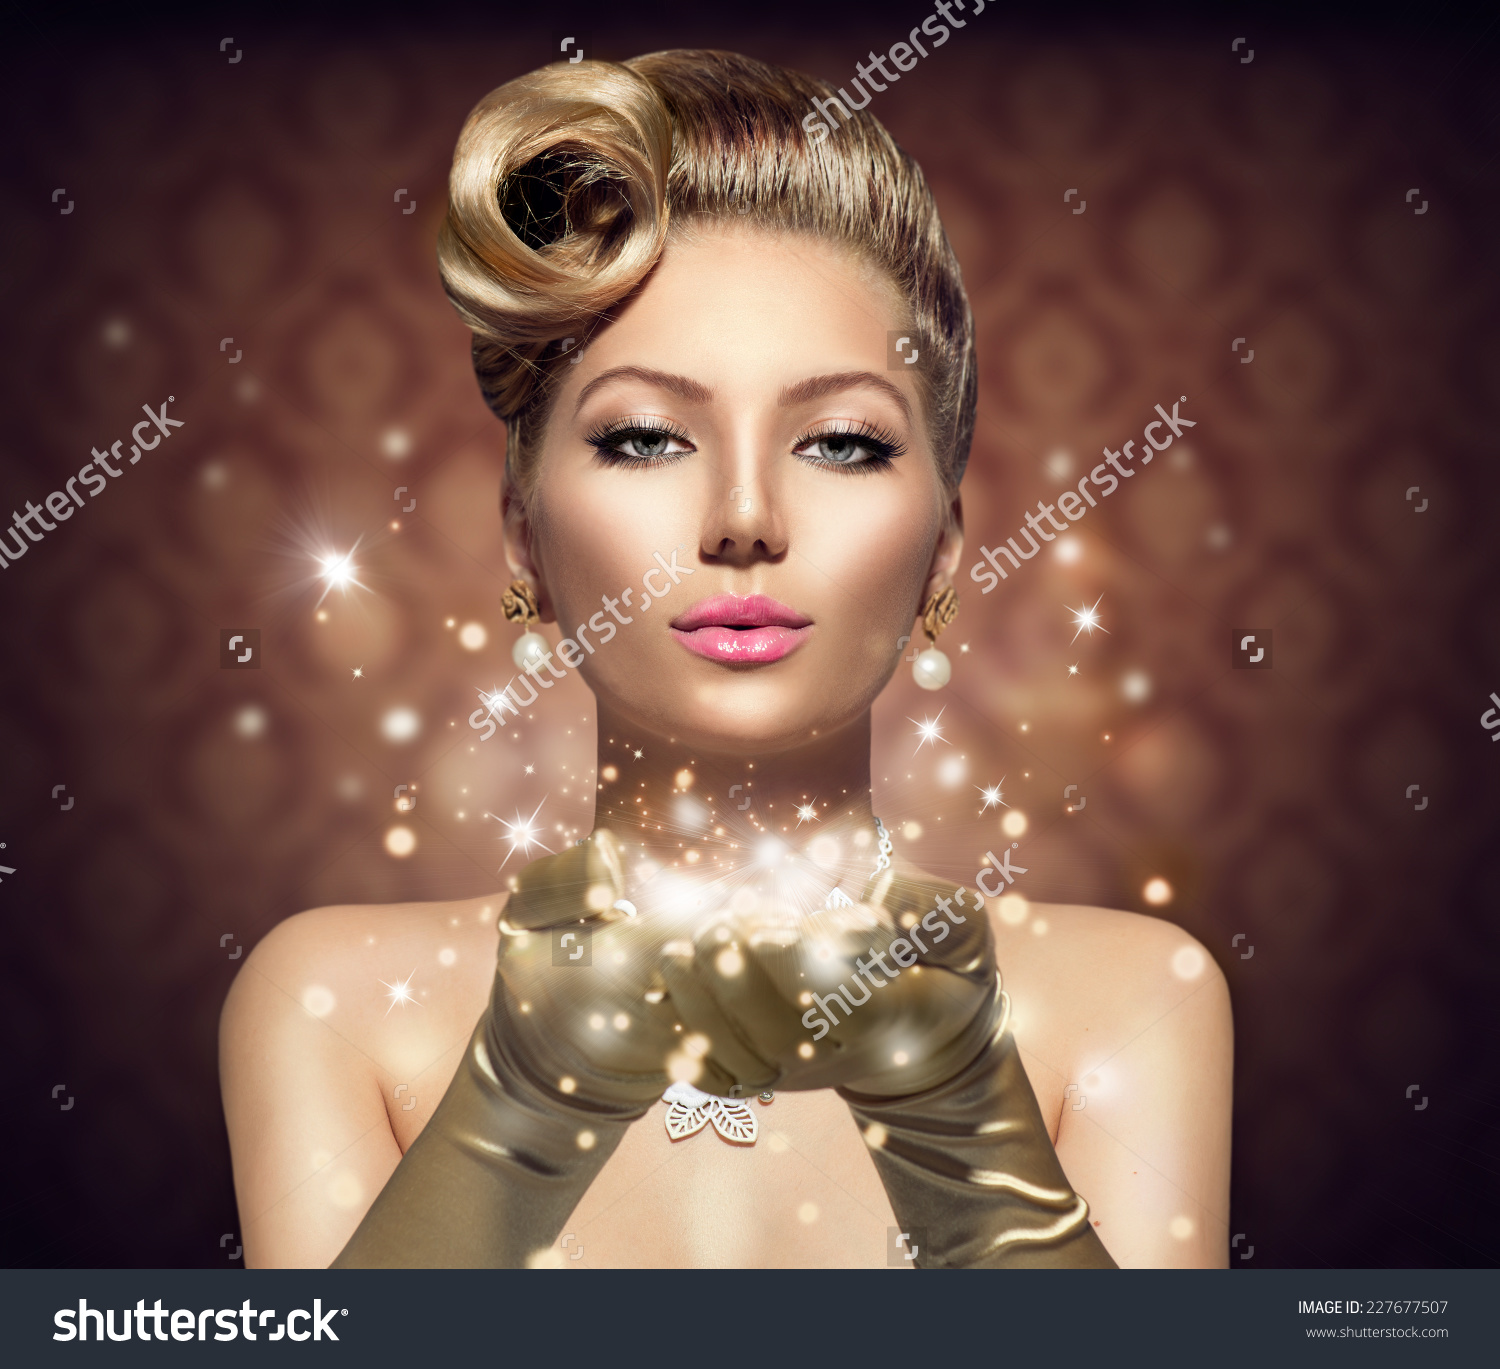 stock-photo-holiday-retro-woman-blowing-magic-dust-in-her-hand-beauty-fashion-christmas-vintage-style-lady-227677507.jpg